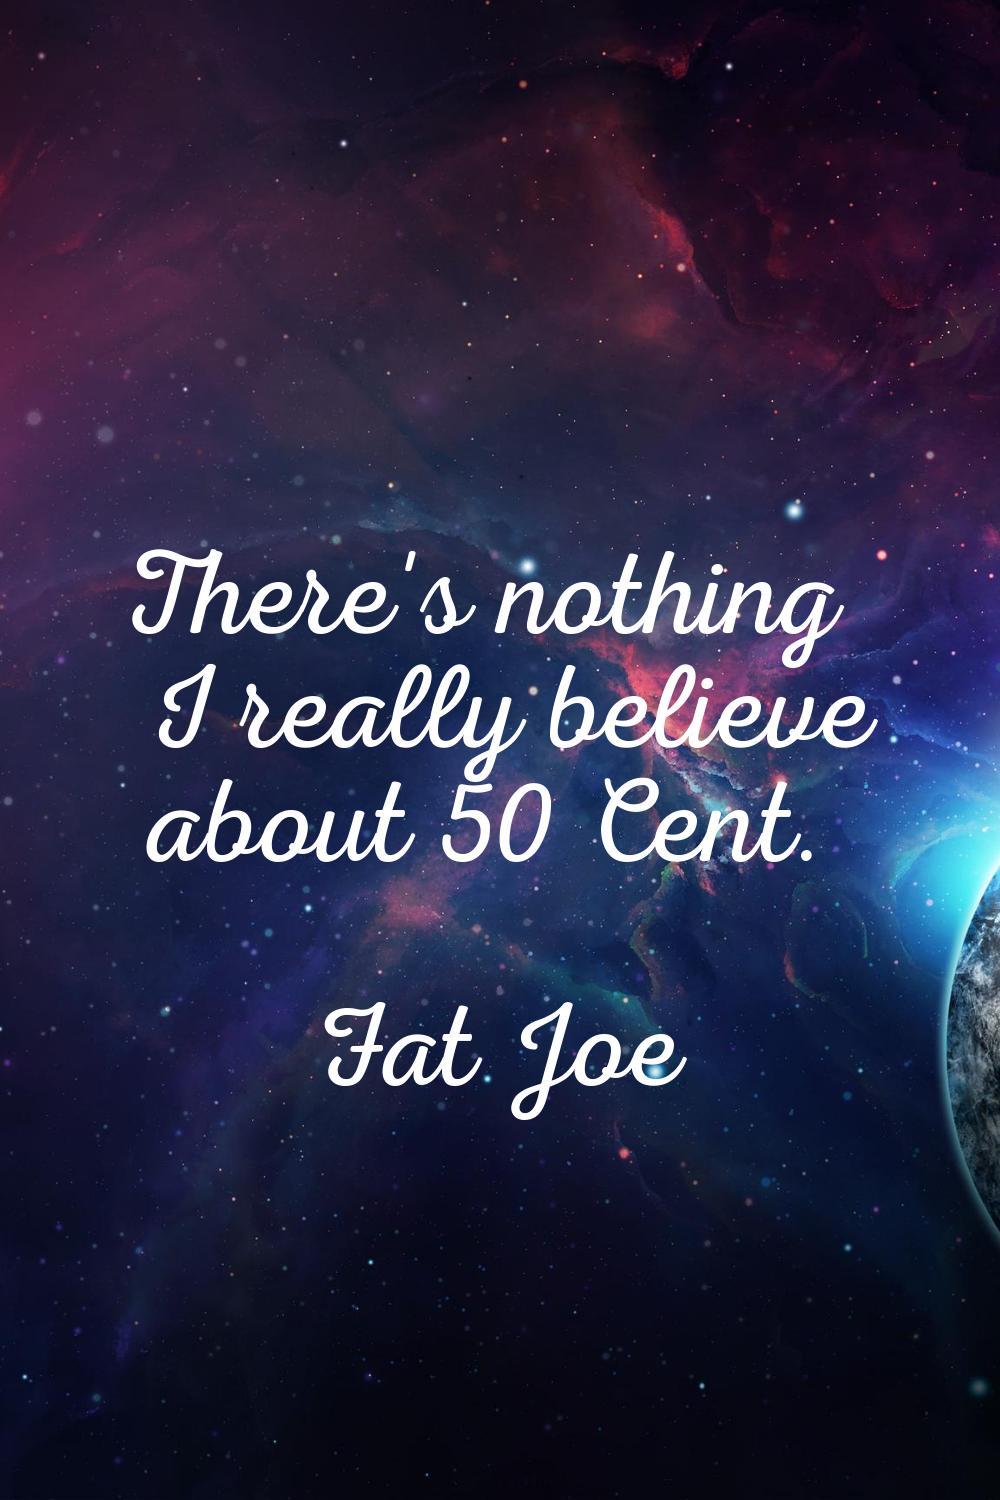 There's nothing I really believe about 50 Cent.